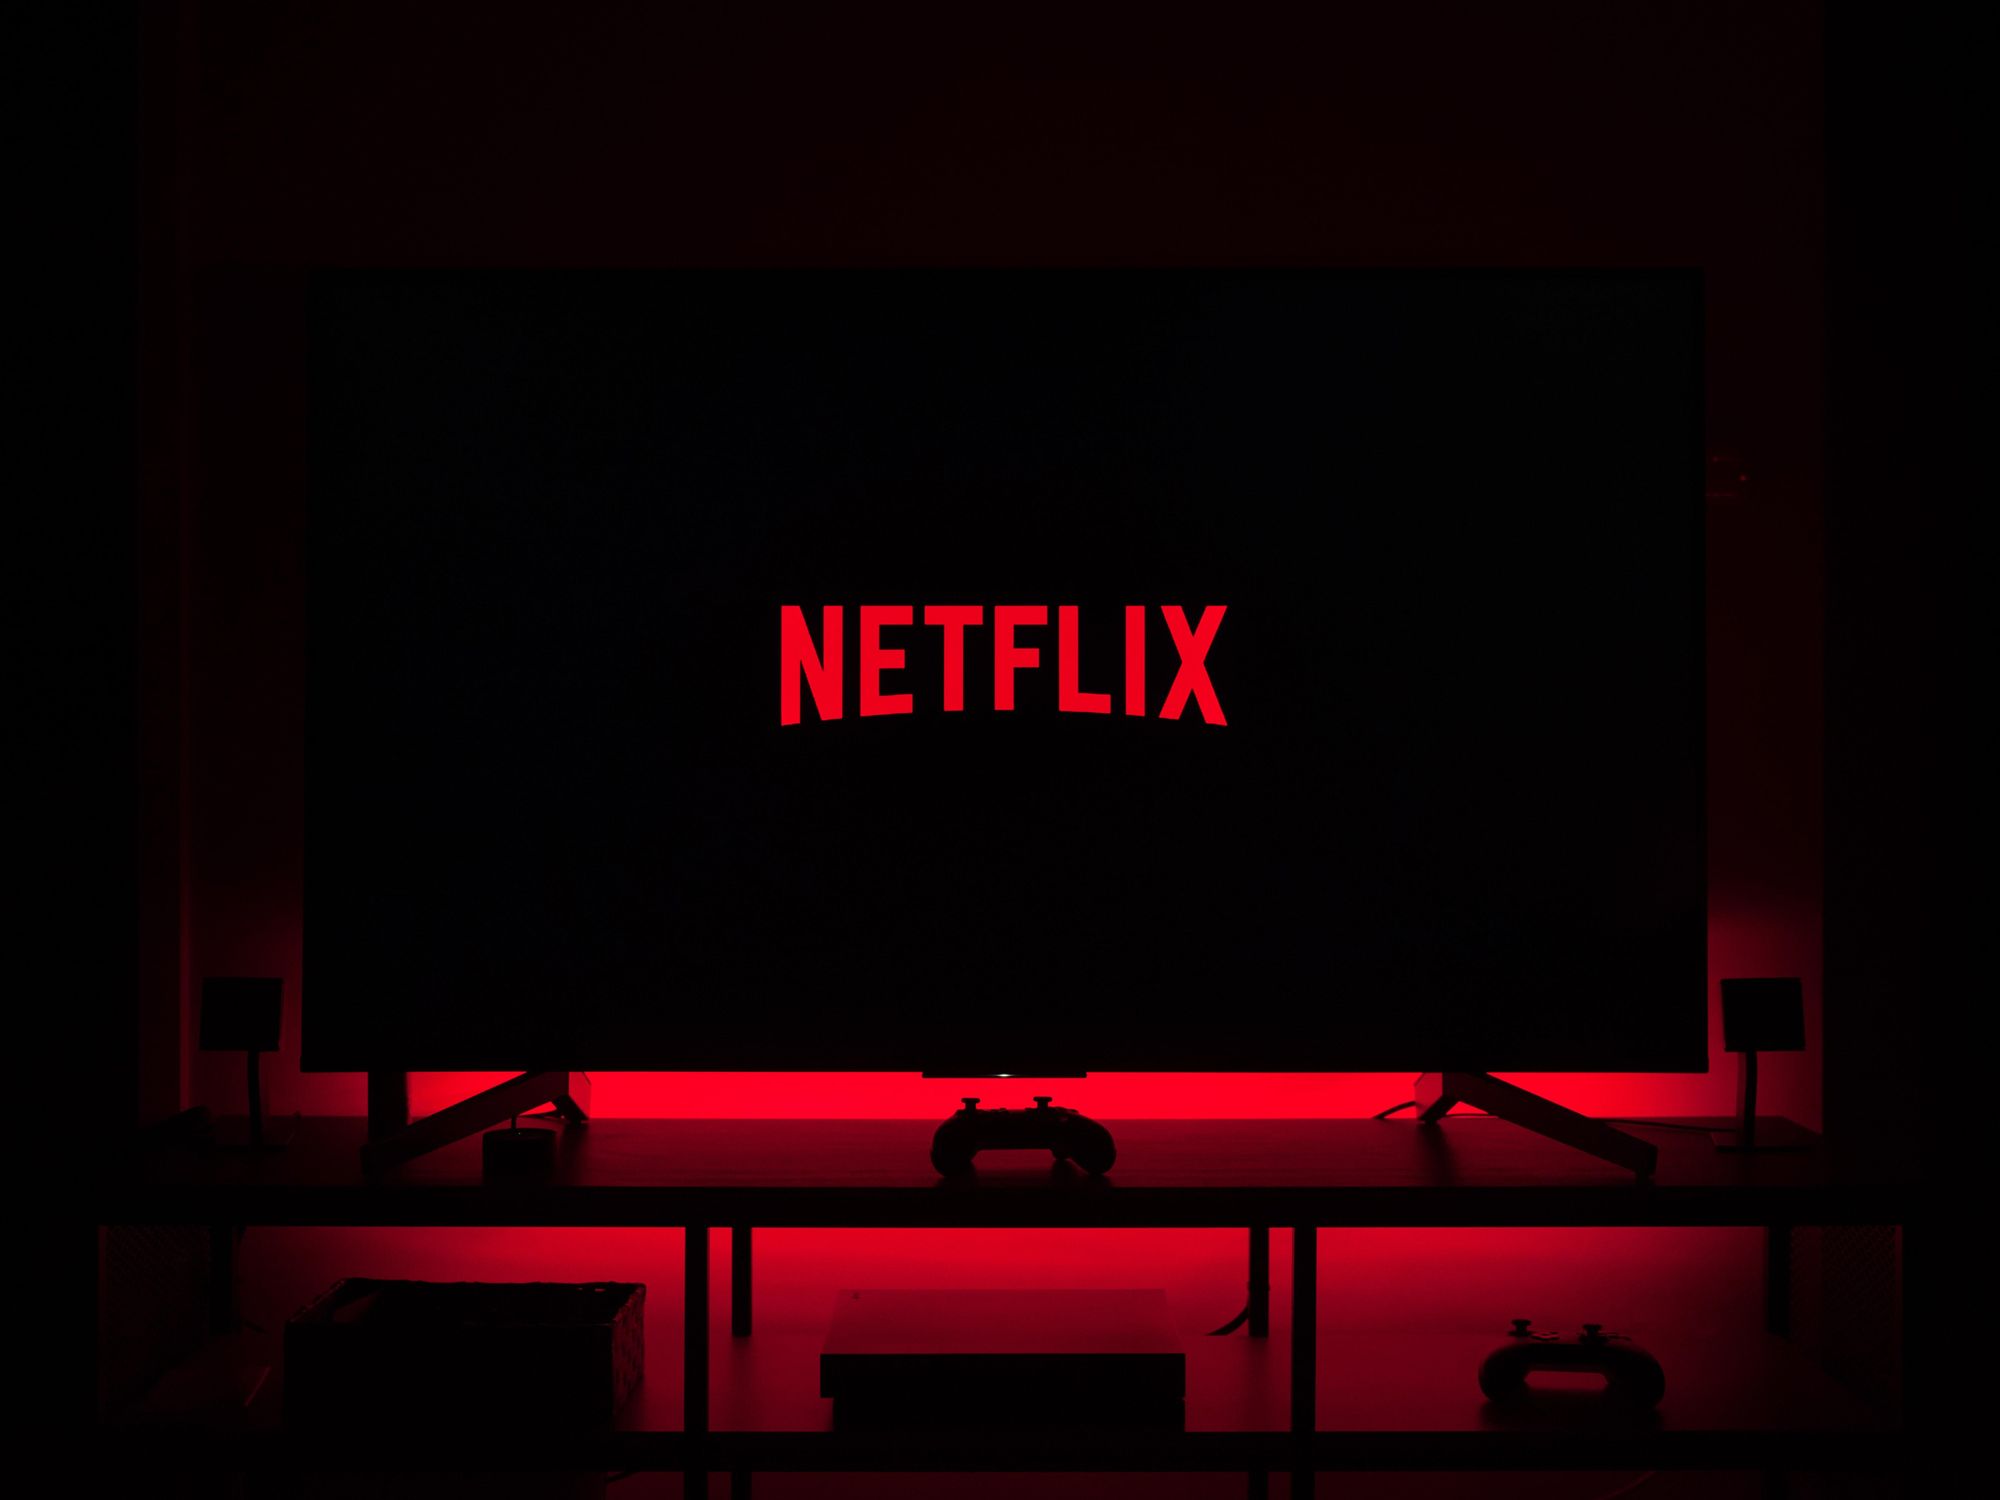 Netflix is reportedly developing 'Netflix for gaming' - FlatpanelsHD